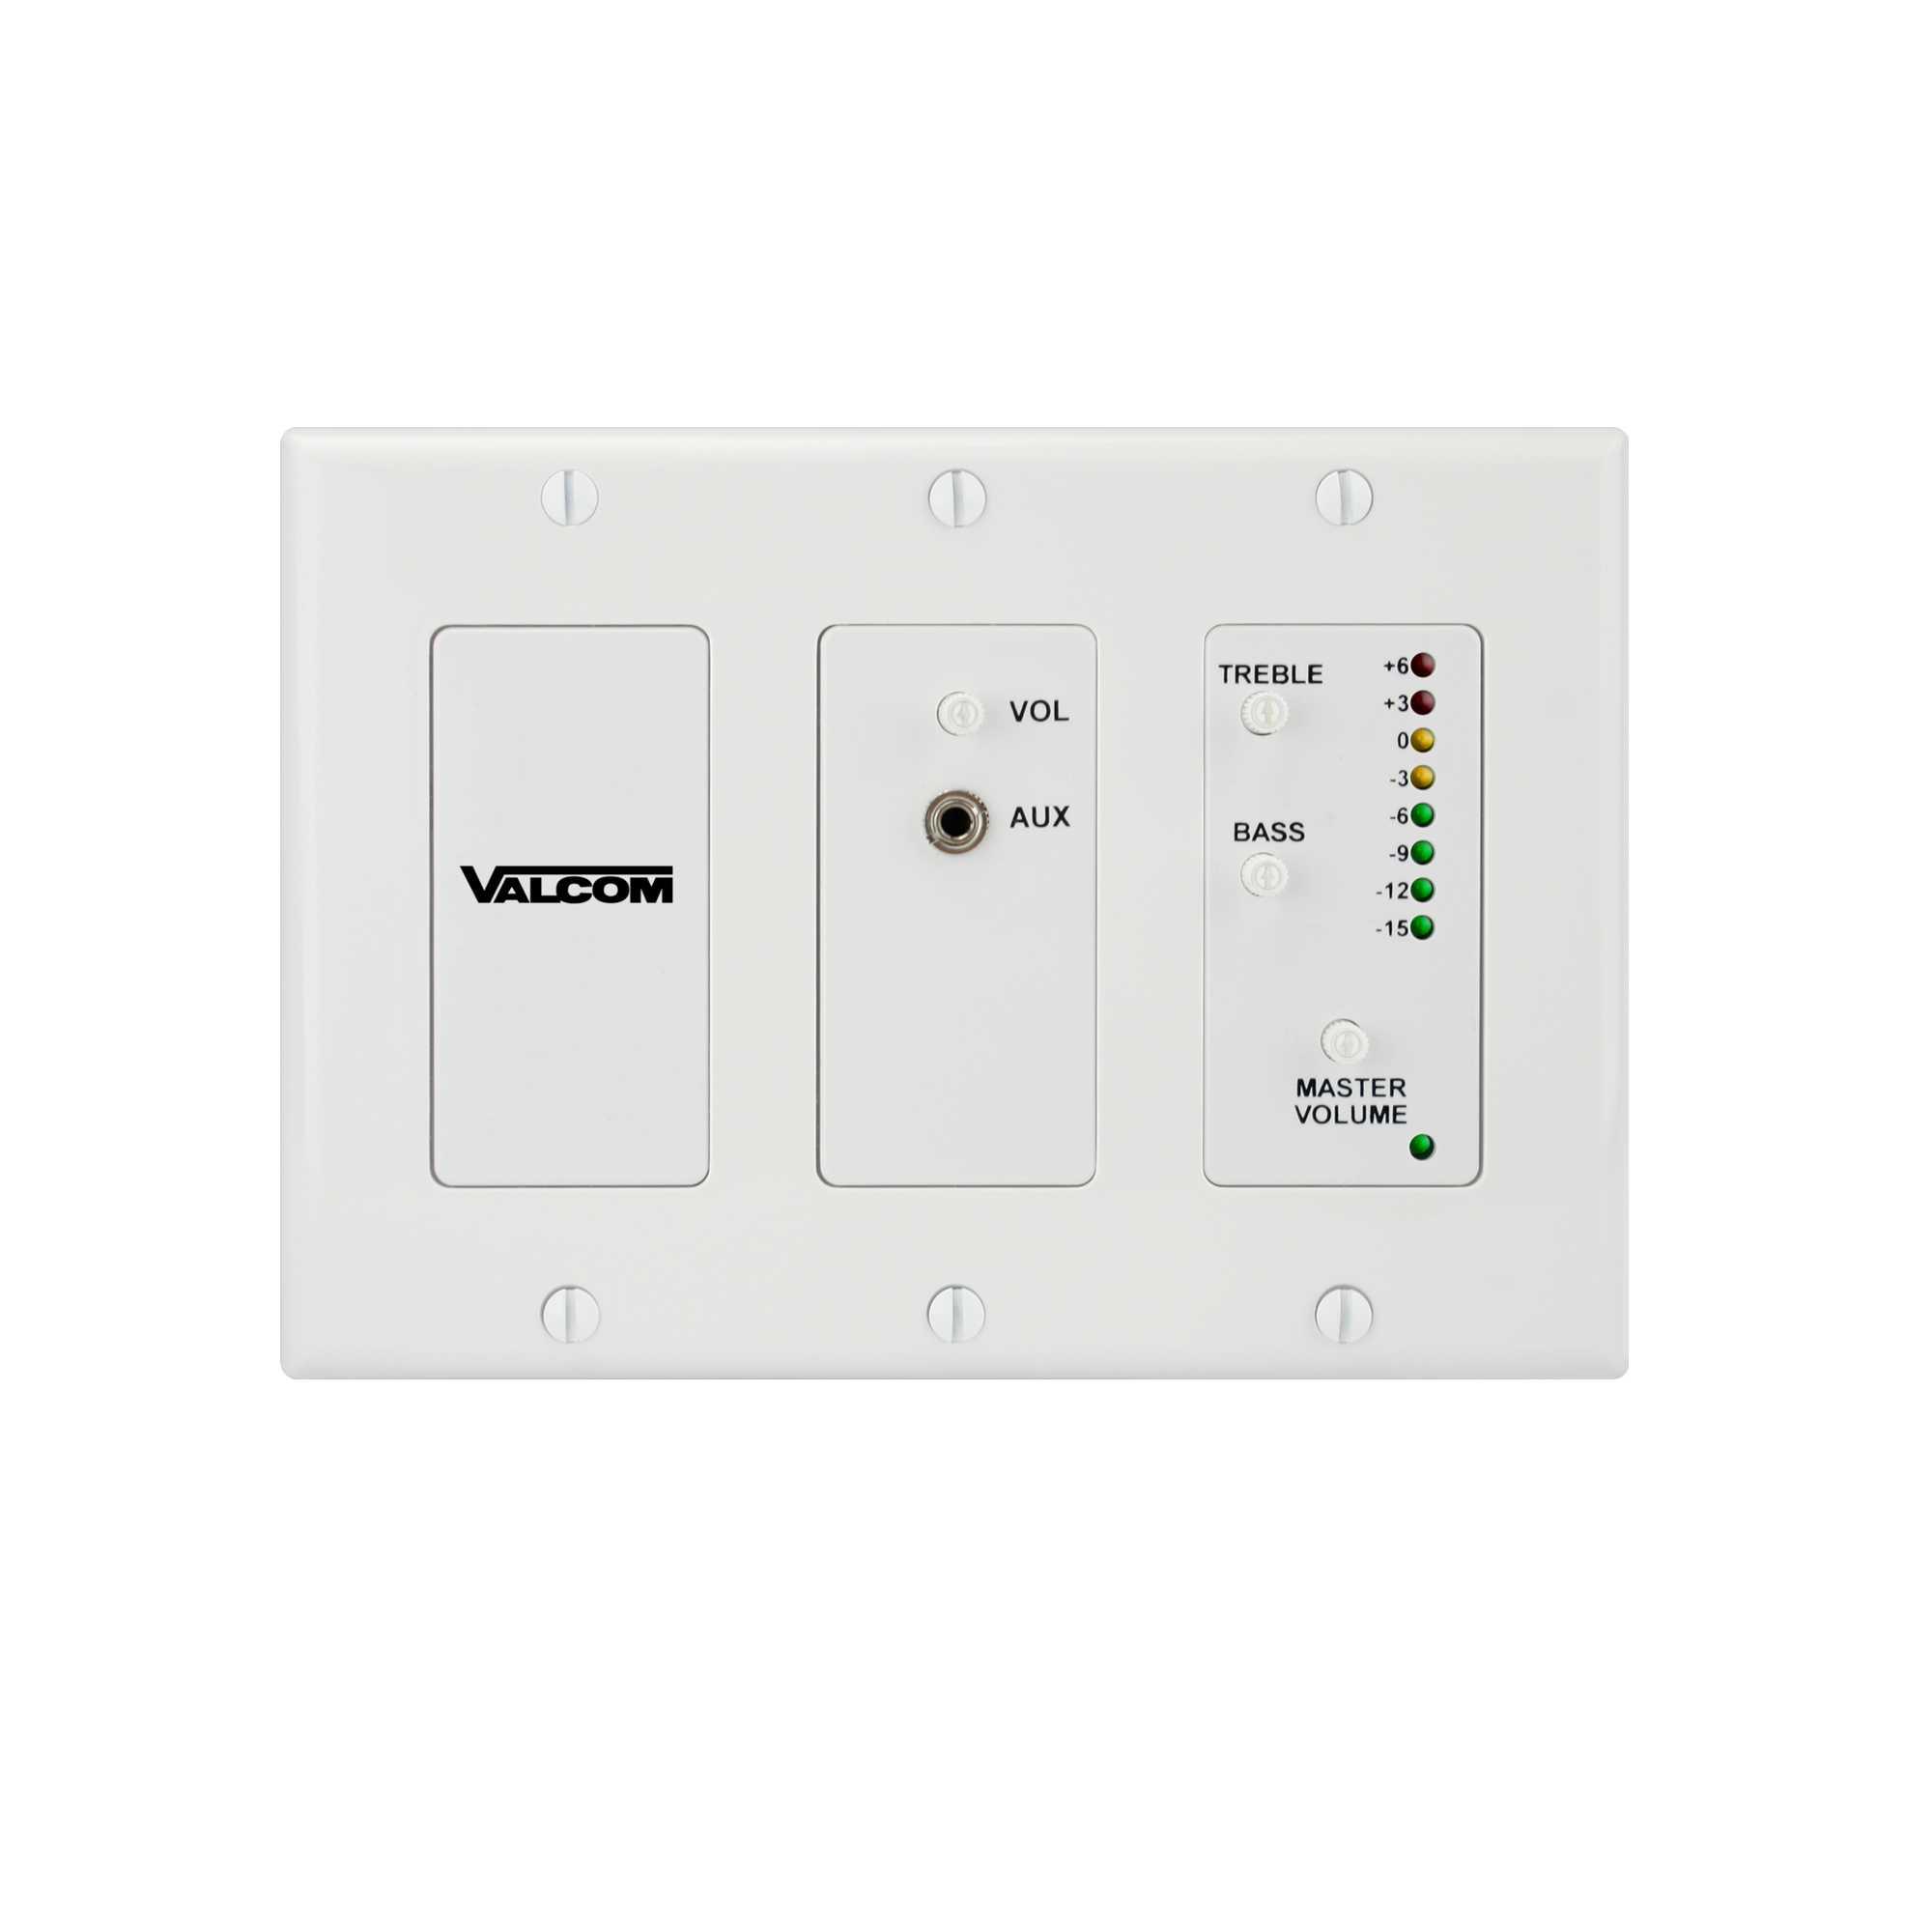 V-9983-W In-Wall Audio Mixer, 2-Channel, White